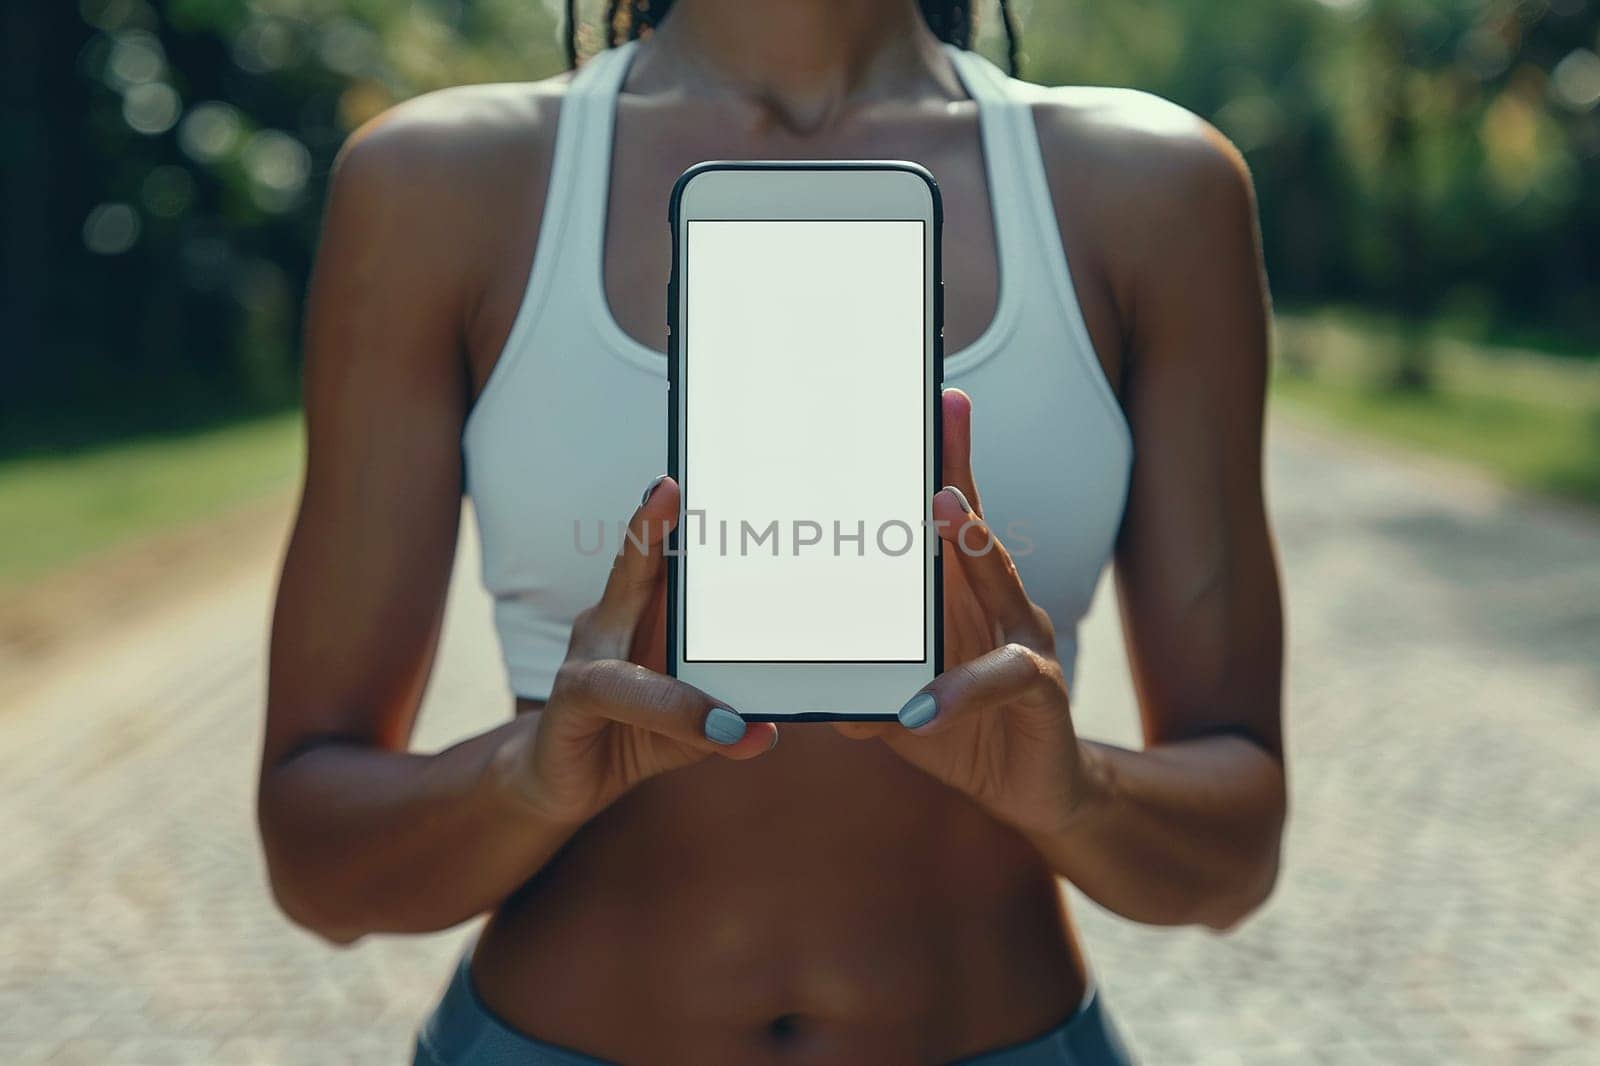 A slender dark-skinned woman in sportswear is holding a smartphone with a blank white screen.